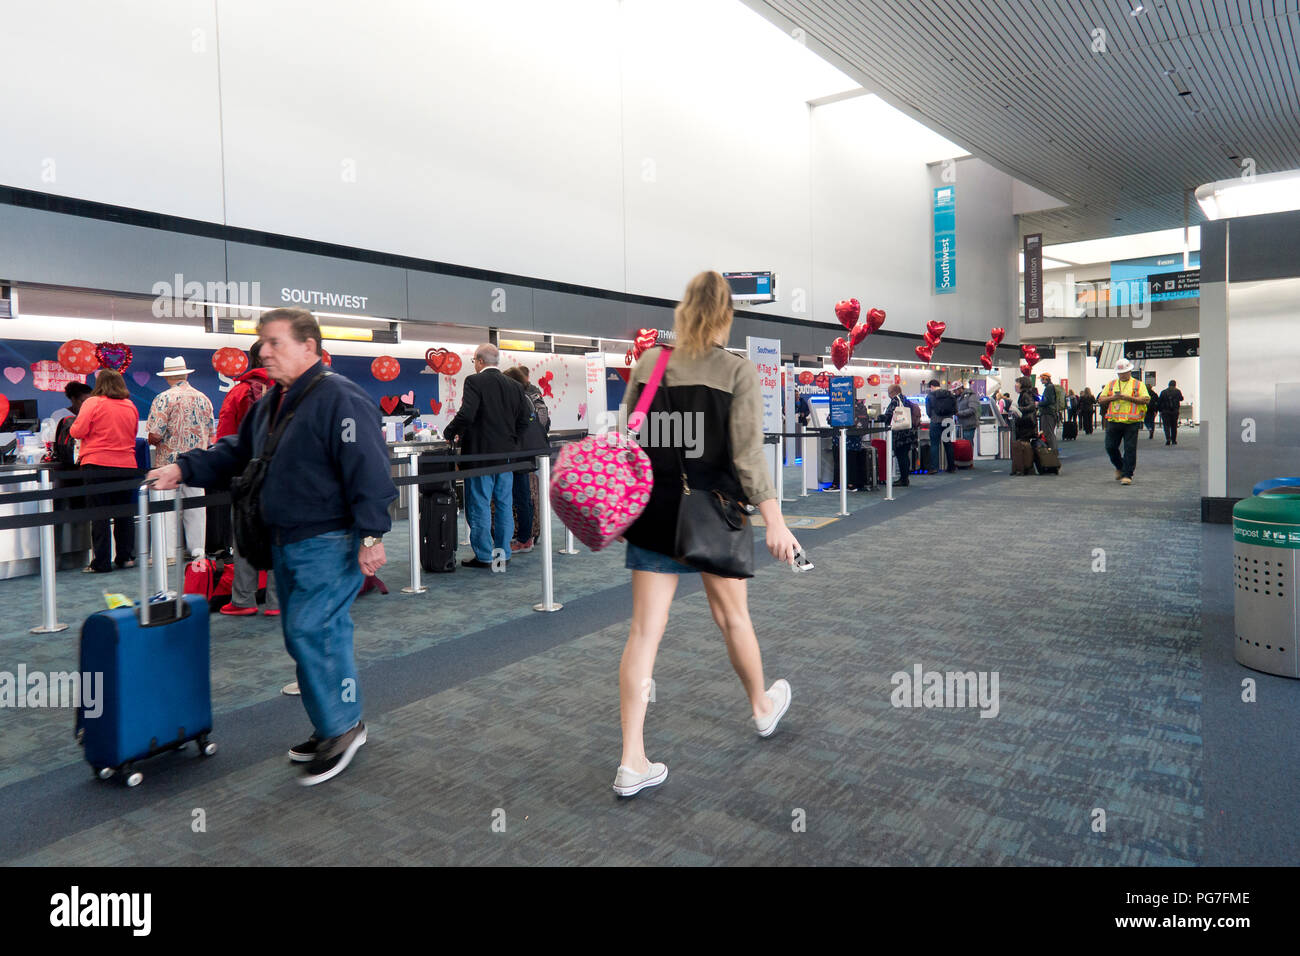 Southwest Airlines check in counters at San Francisco International Airport - San Francisco, California USA Stock Photo